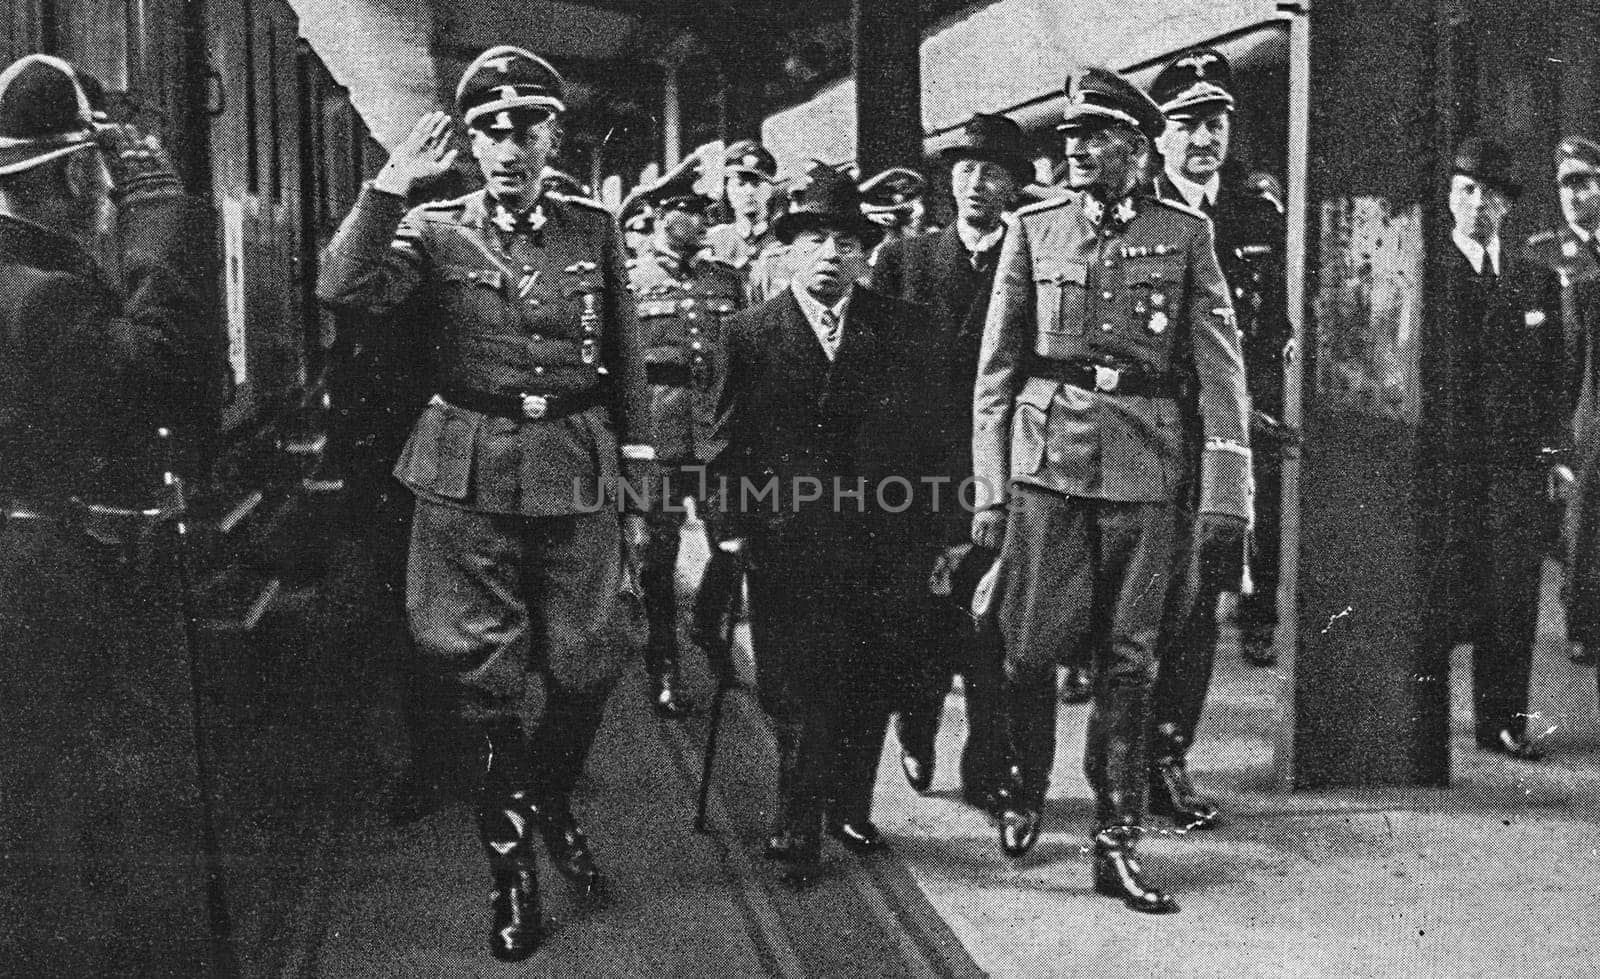 PRAGUE, PROTECTORATE OF BOHEMIA AND MORAVIA - APRIL 20, 1942: The Deputy Reich Protector Obergruppenf hrer Reinhard Heydrich, president Emil Hacha and then State Secretary Gruppenf hrer Karl Hermann Frank. On the day of Adolf Hitler's 53rd birthday, on April 20, 1942, State President Emil H cha presented a gift from the Protectorate of Bohemia and Moravia to Hitler at the Central Station in Prague